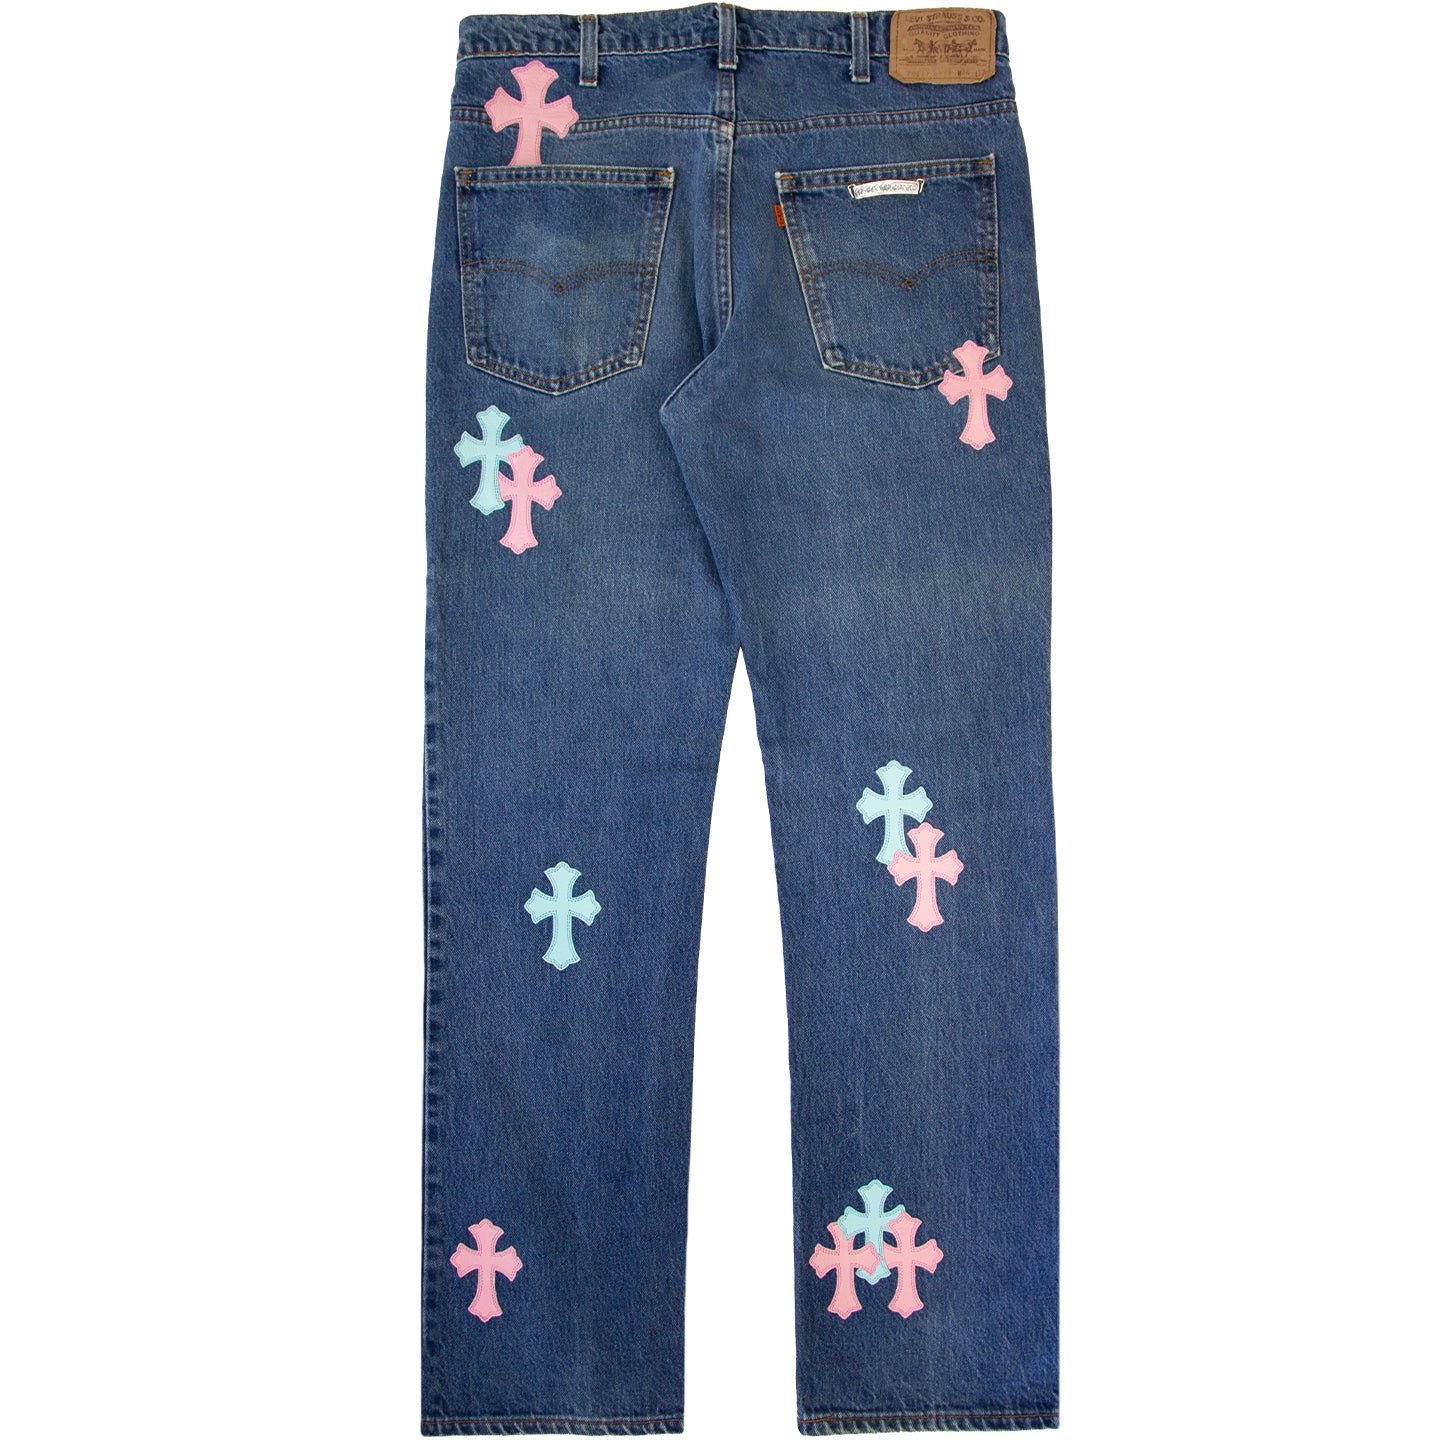 chrome hearts patches jeans｜TikTok Search